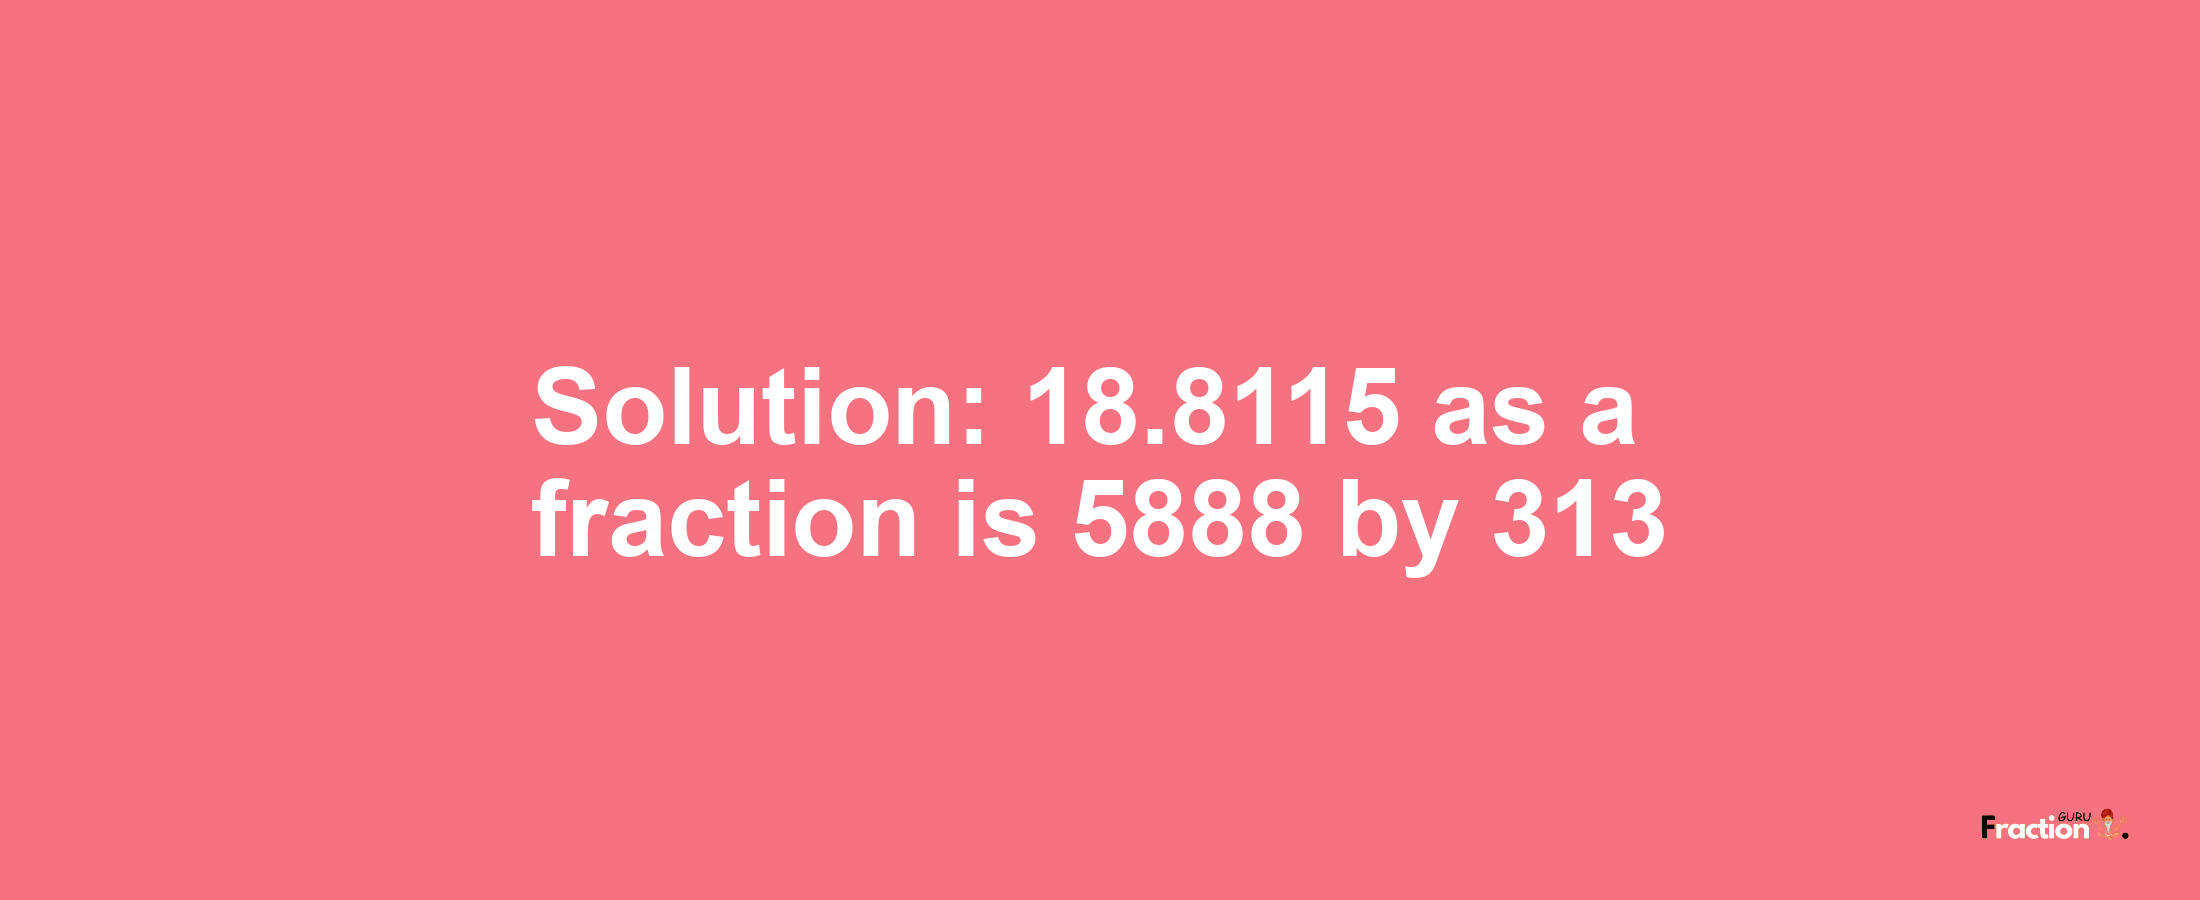 Solution:18.8115 as a fraction is 5888/313